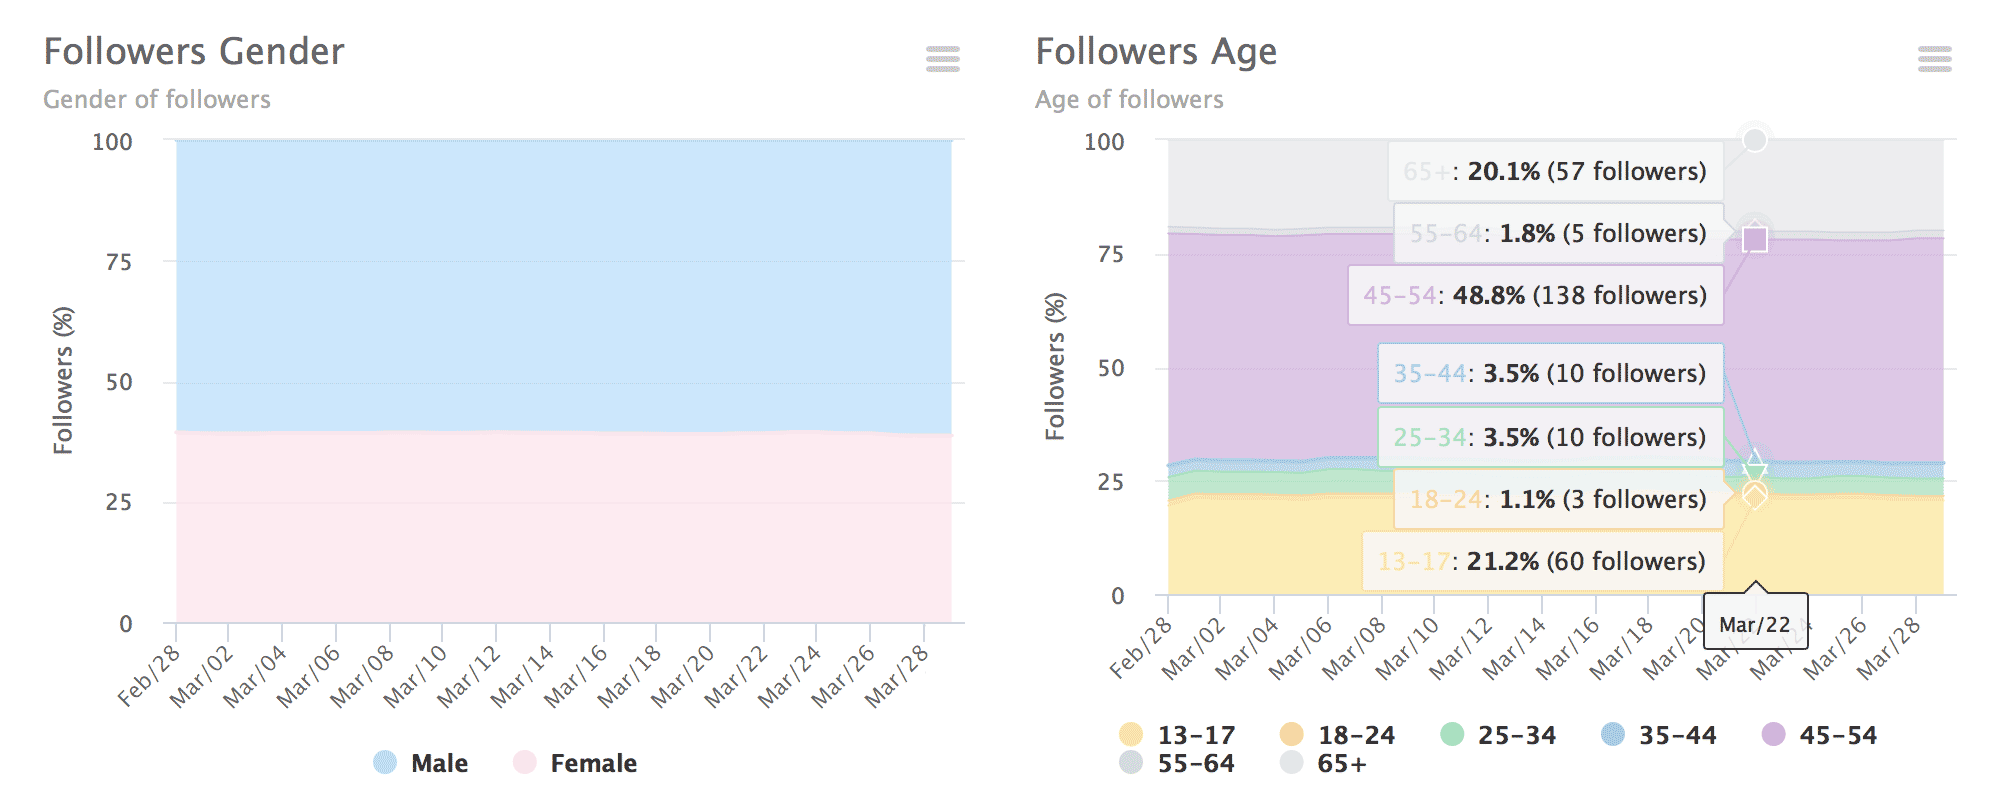 Followers gender and age